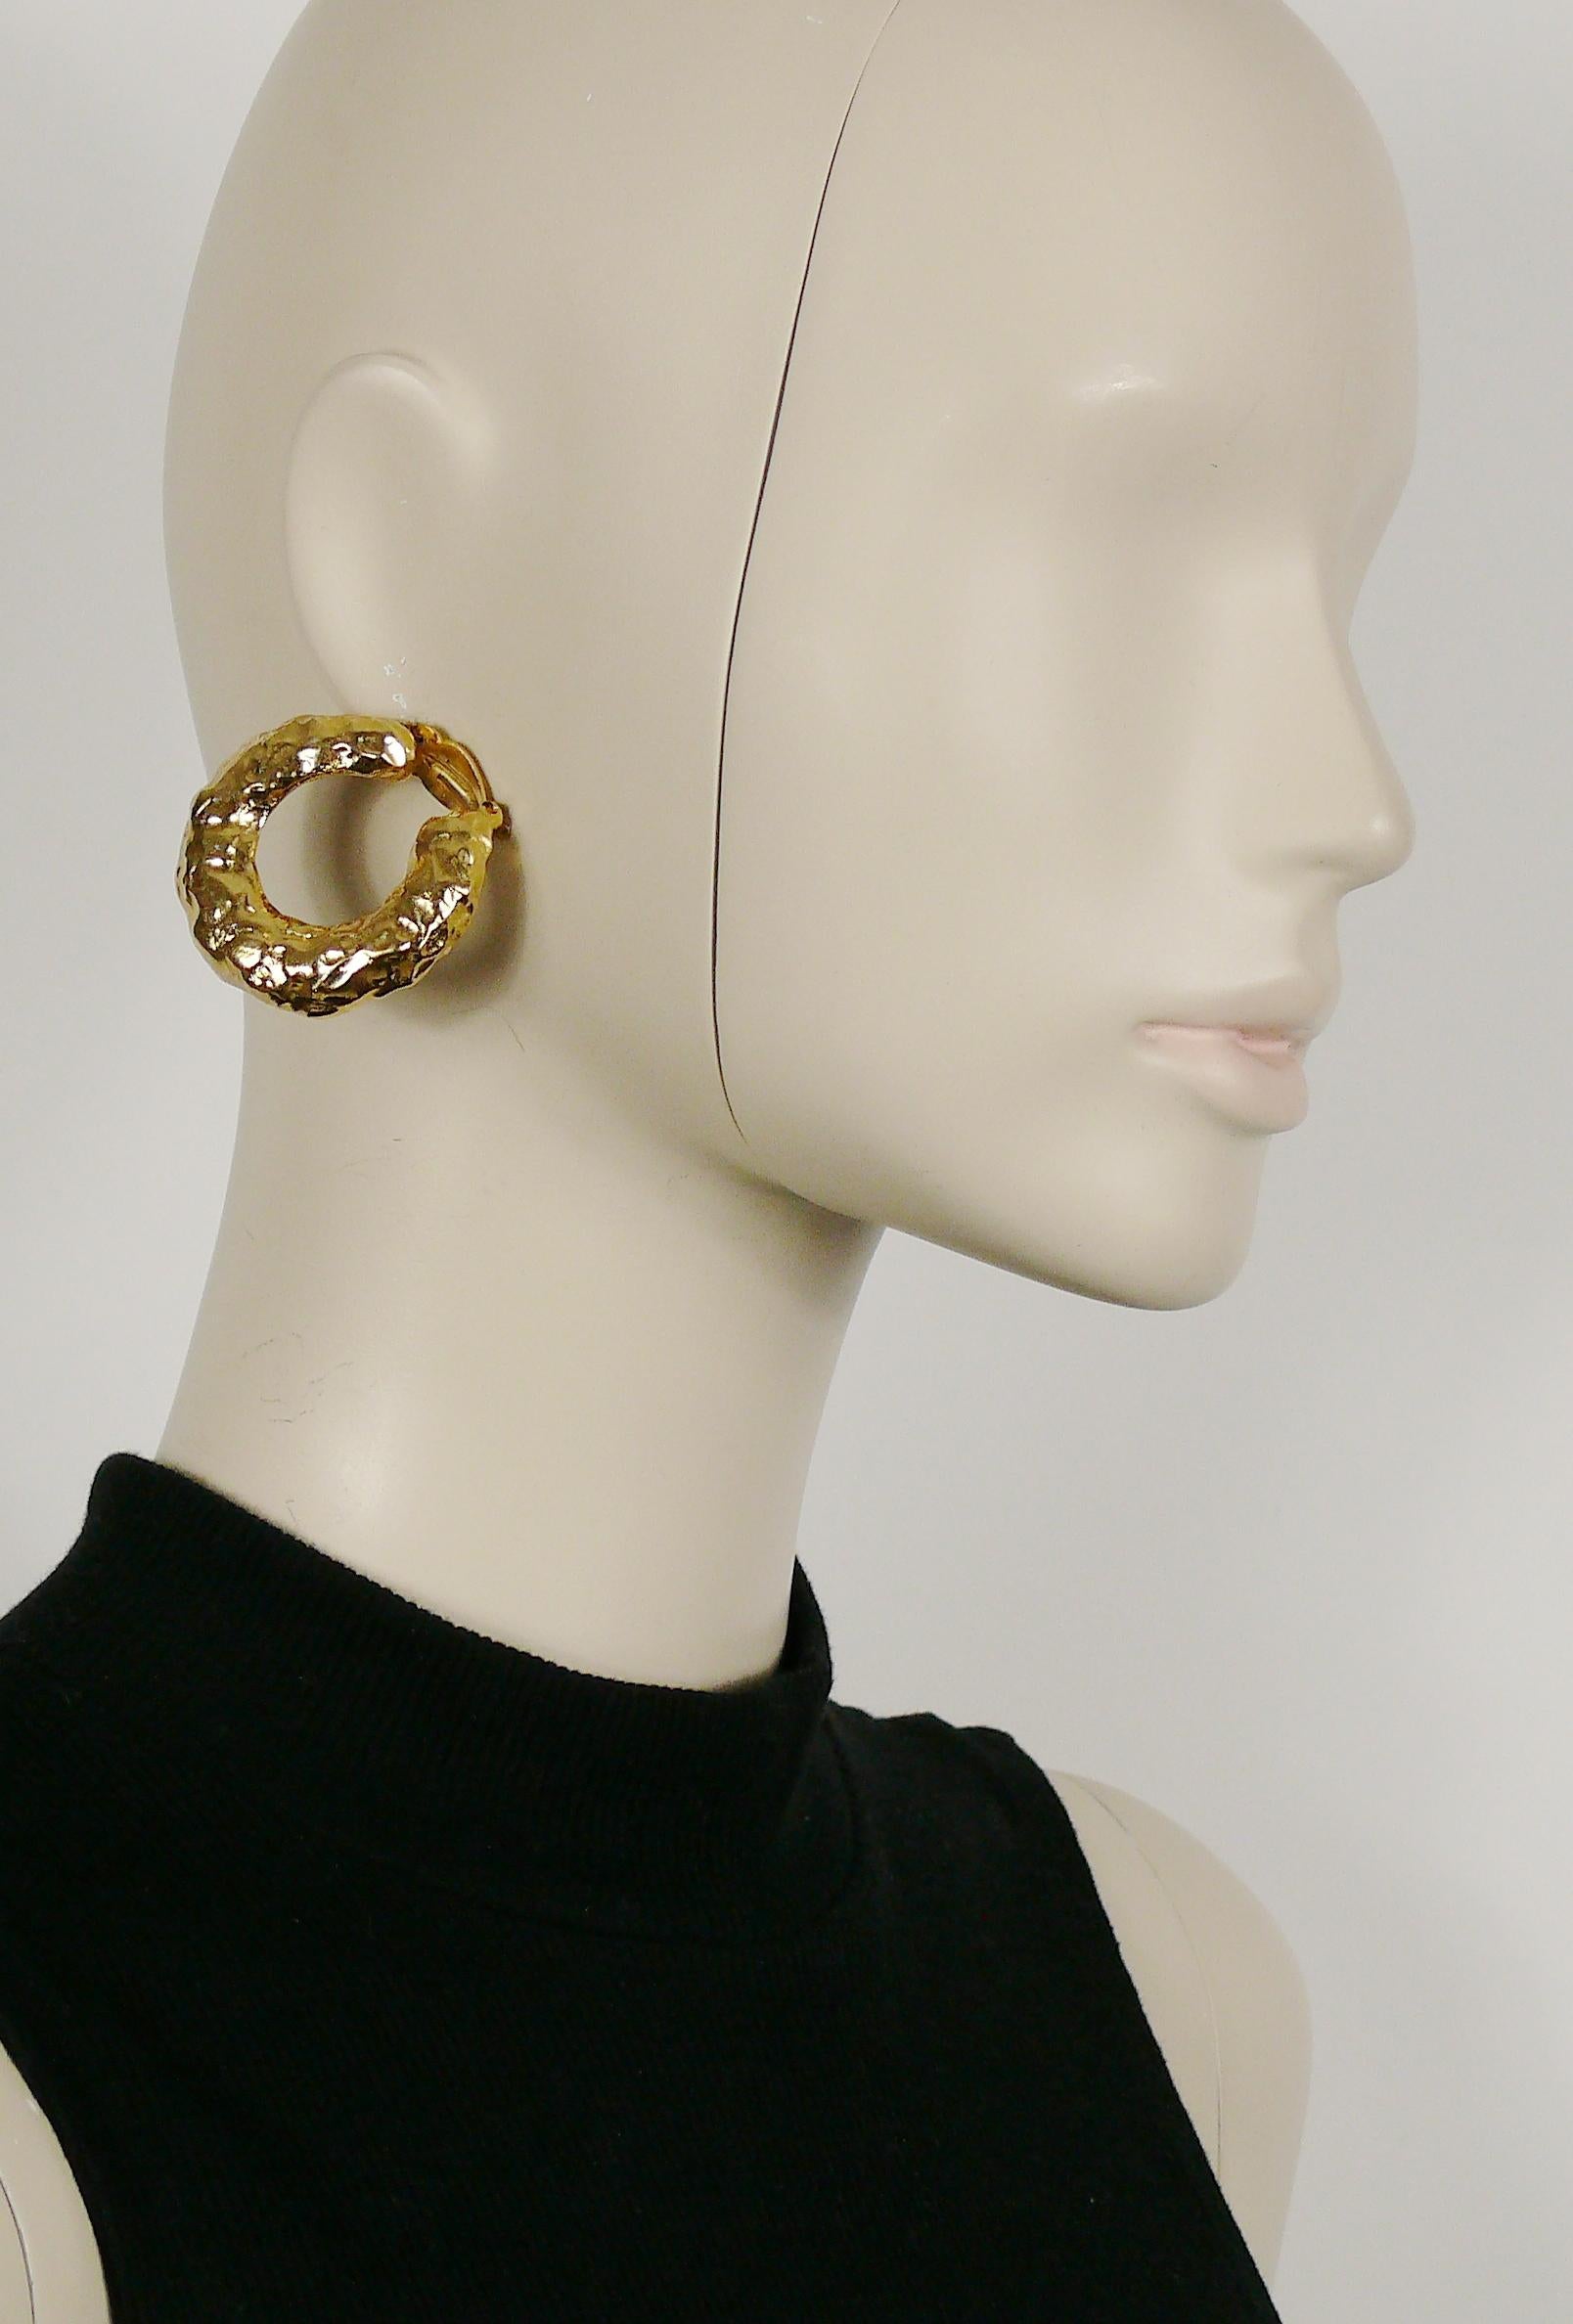 YVES SAINT LAURENT vintage massive gold toned textured hoop earrings (clip-on).

Embossed YSL Made in France.

Indicative measurements : diameter approx. 4.2 cm (1.65 inches).

NOTES
- This is a preloved item, therefore it might have